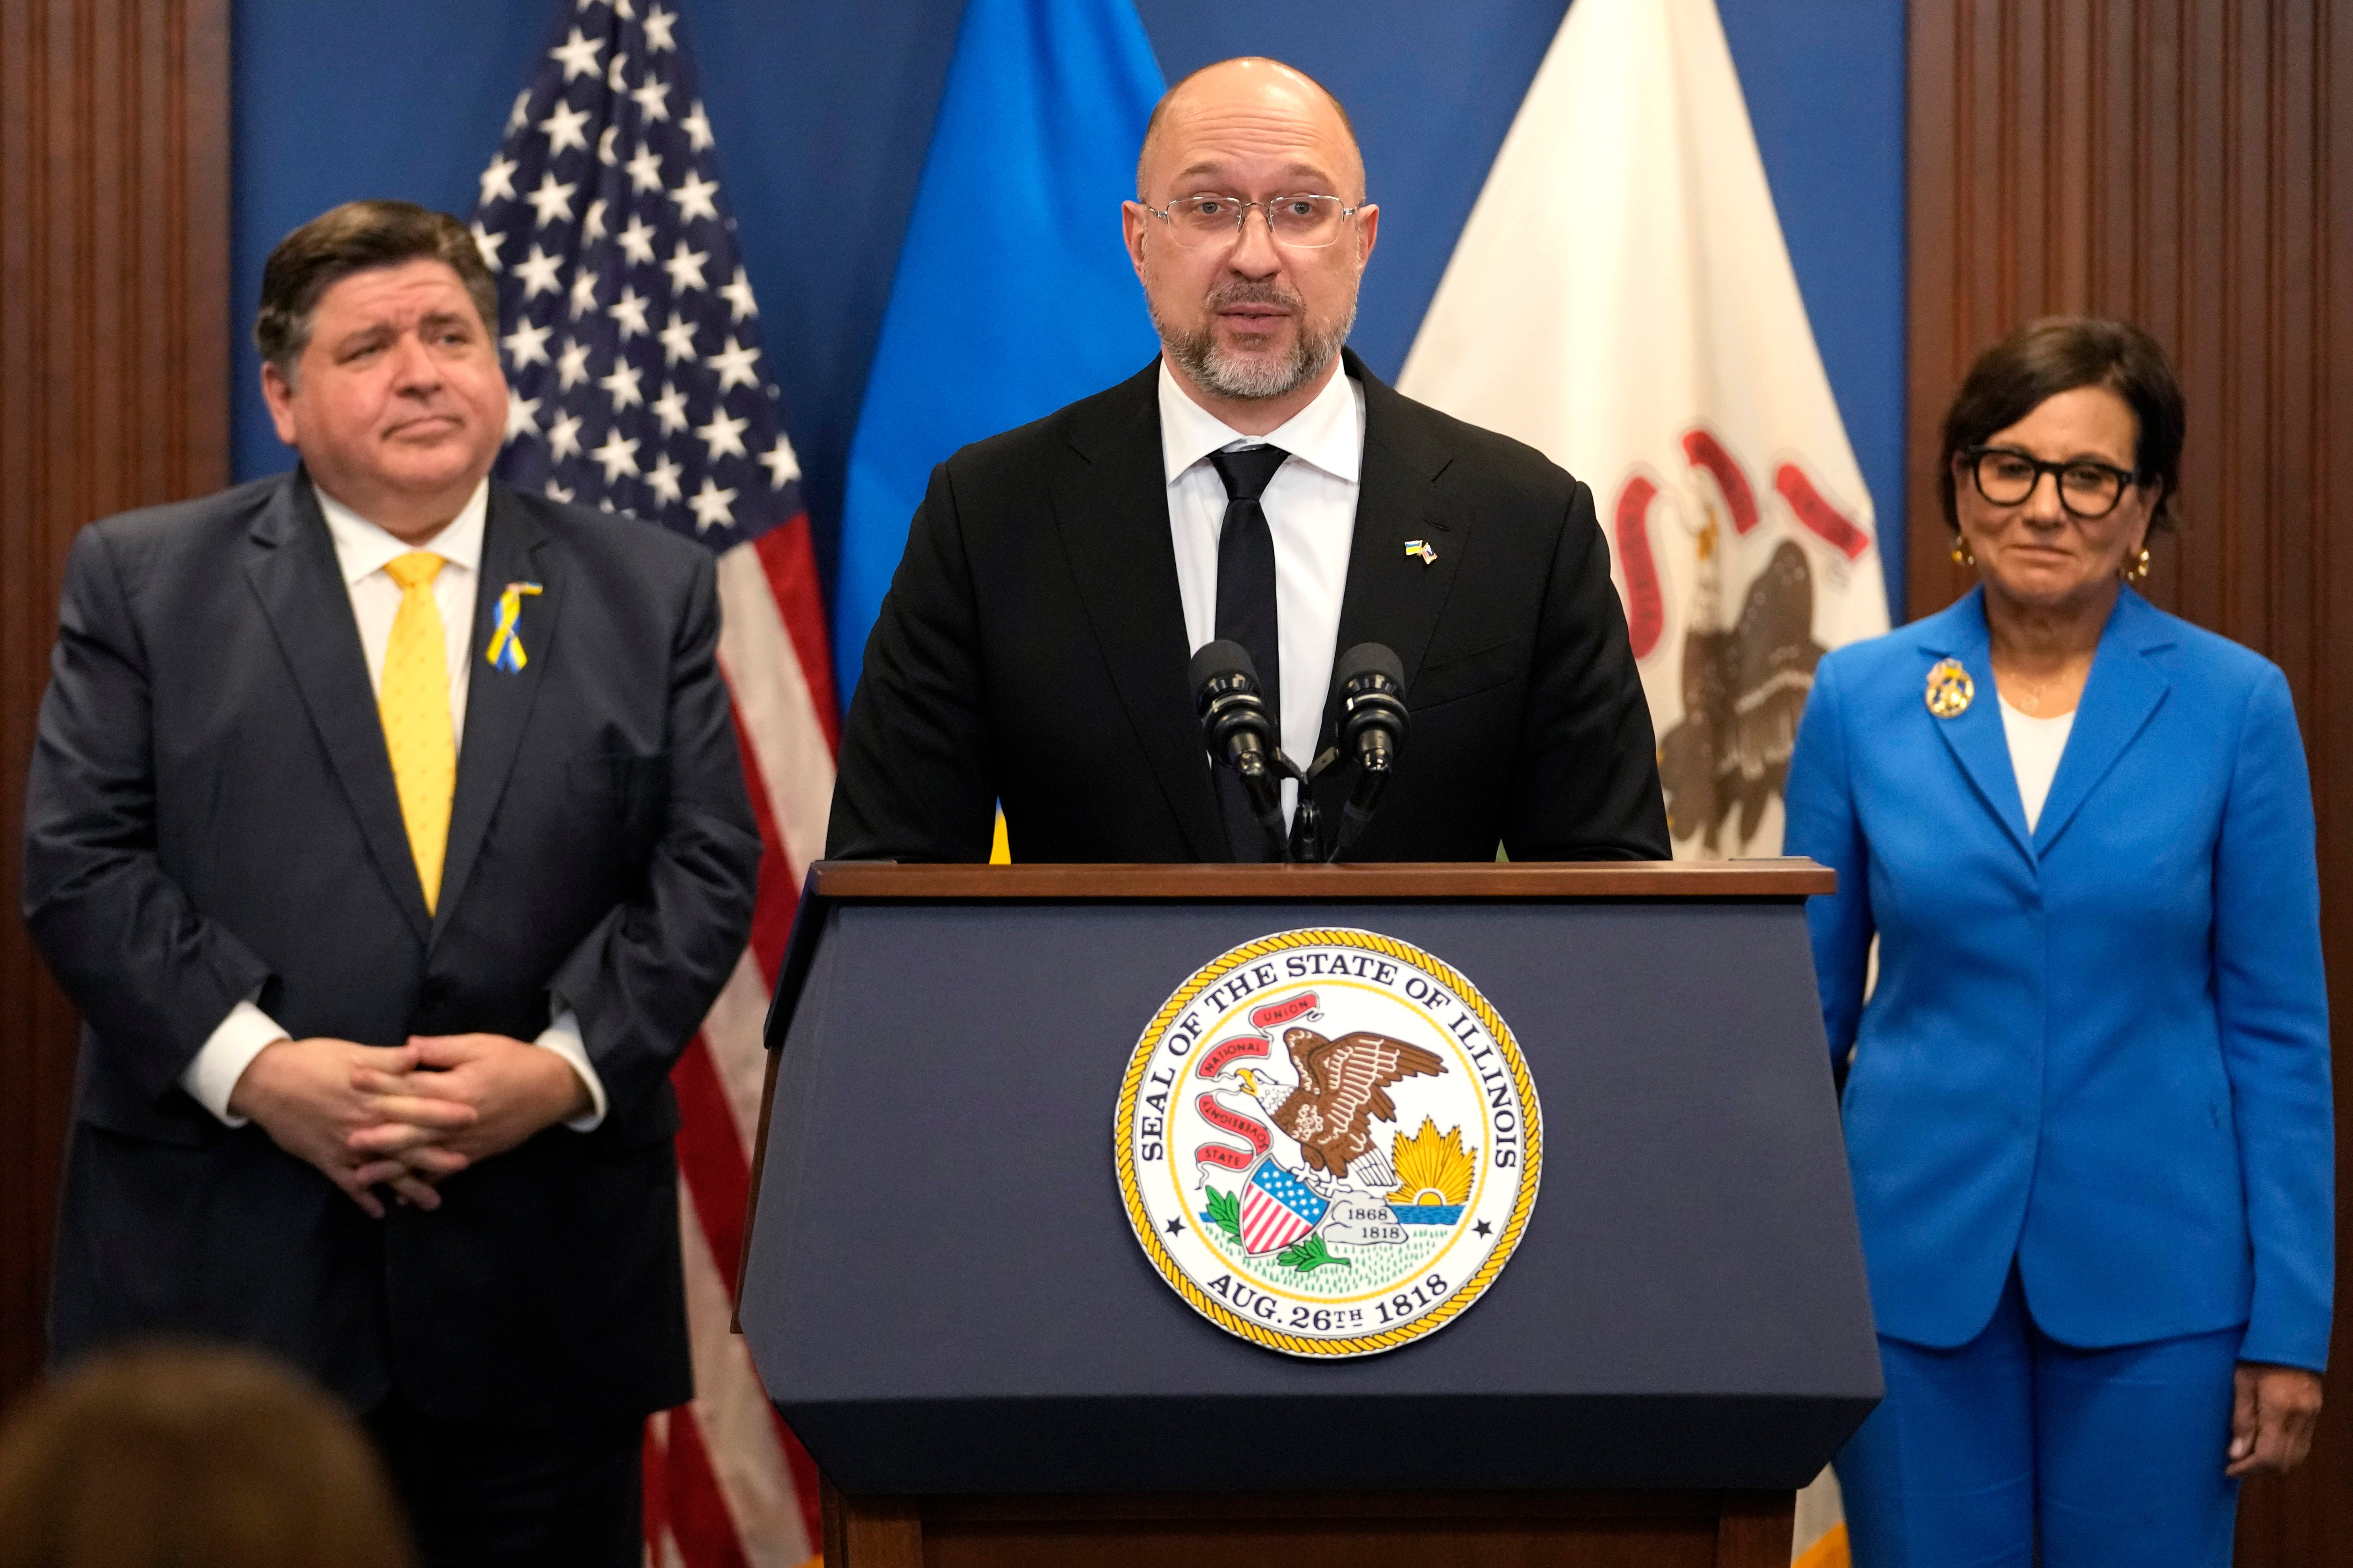 Ukrainian Prime Minister Denys Shmyhal speaking at a news conference in Chicago